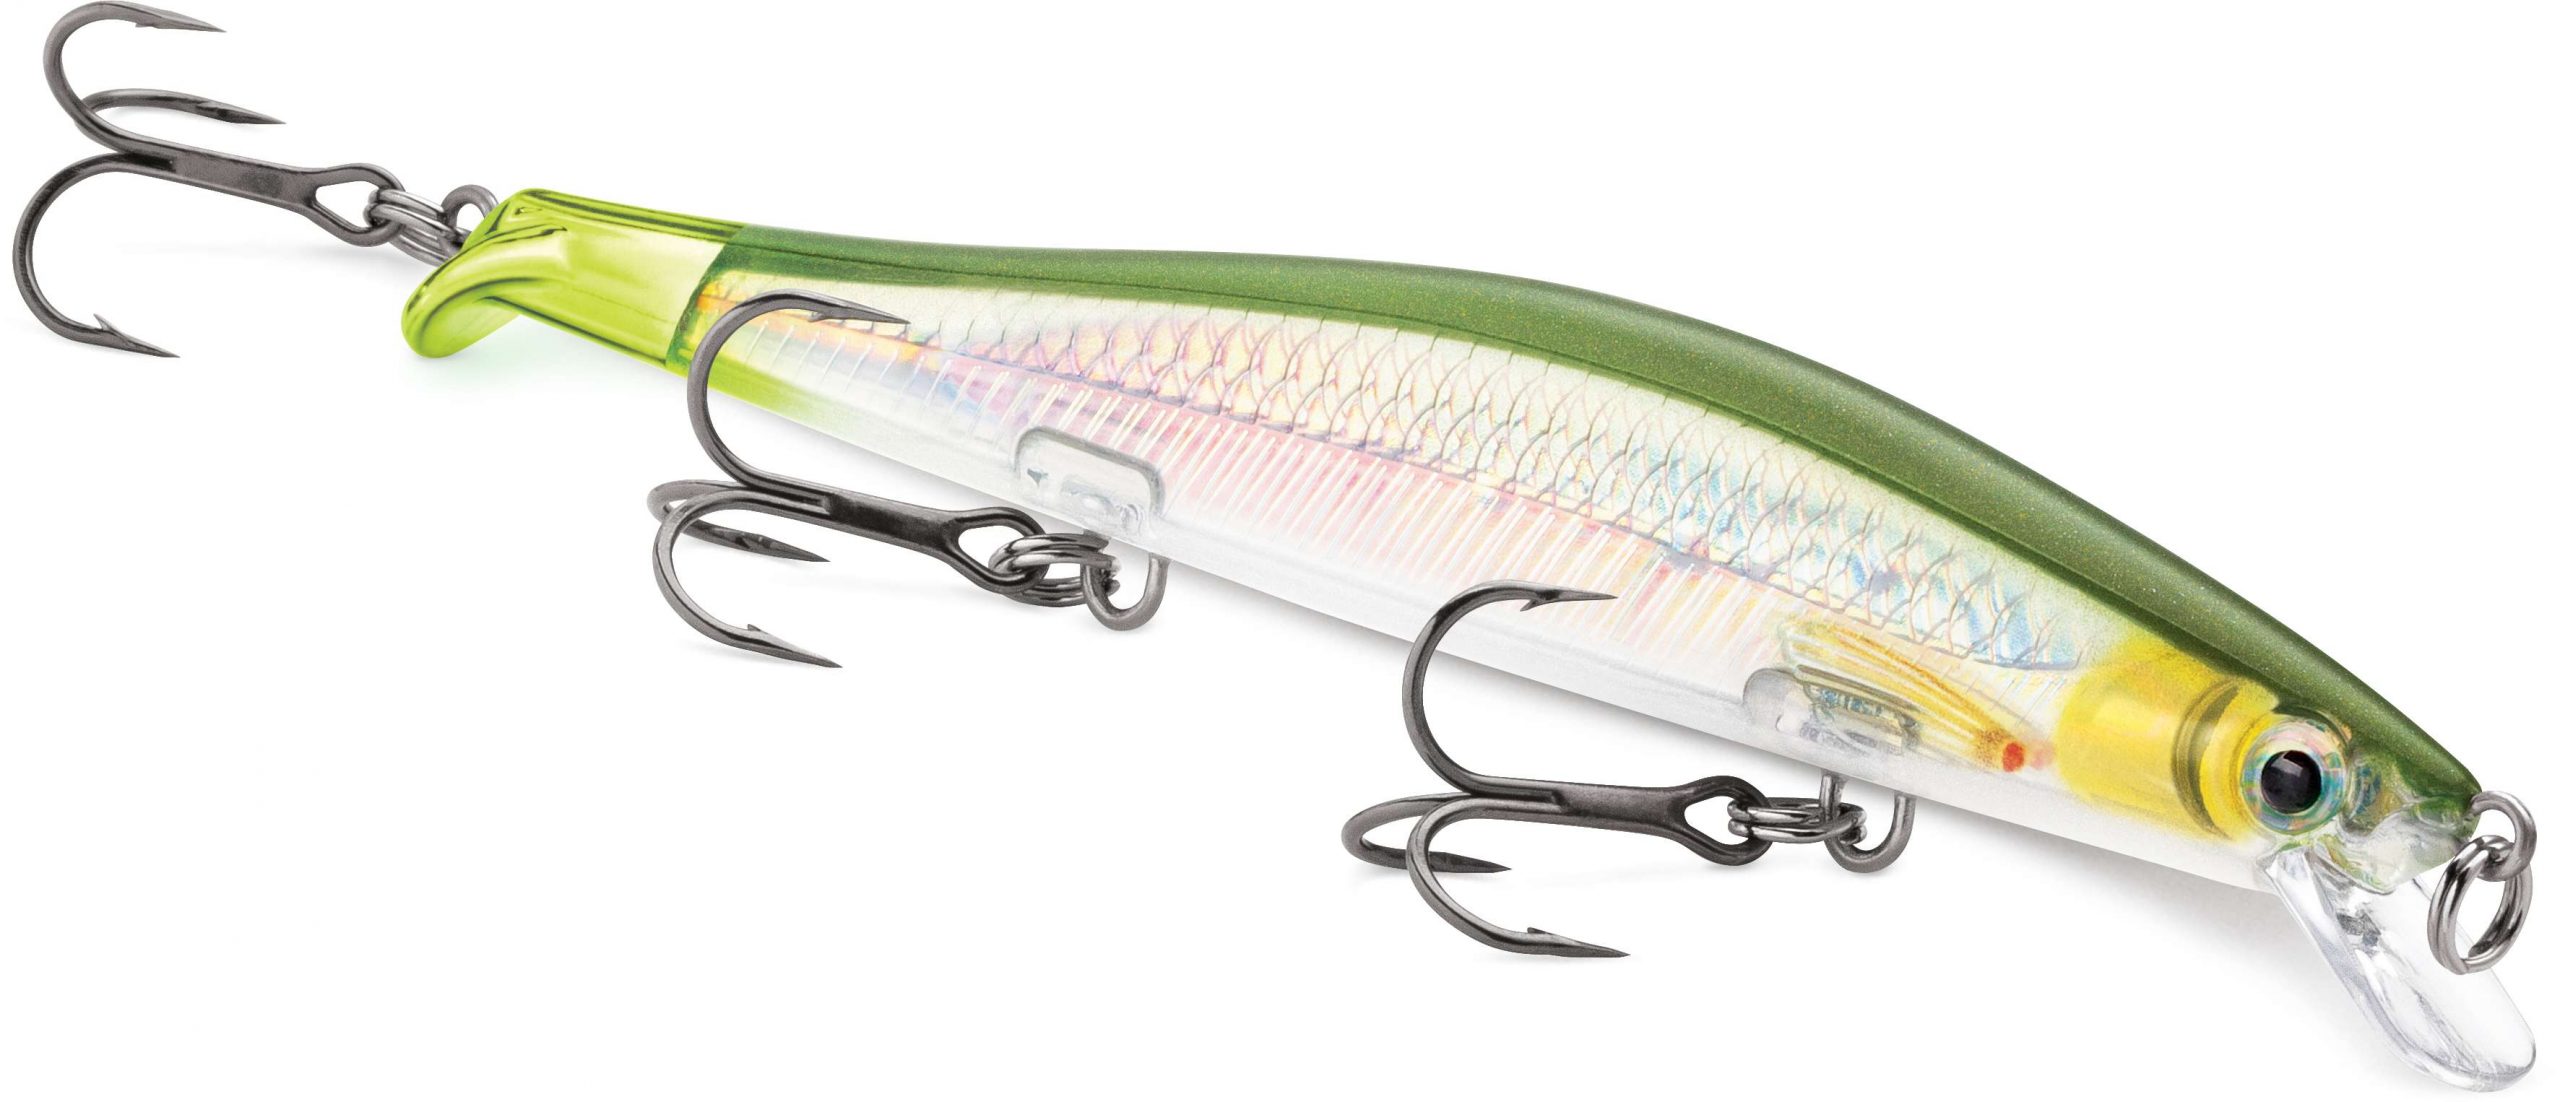 Hot new products from ICAST 2018 - Bassmaster